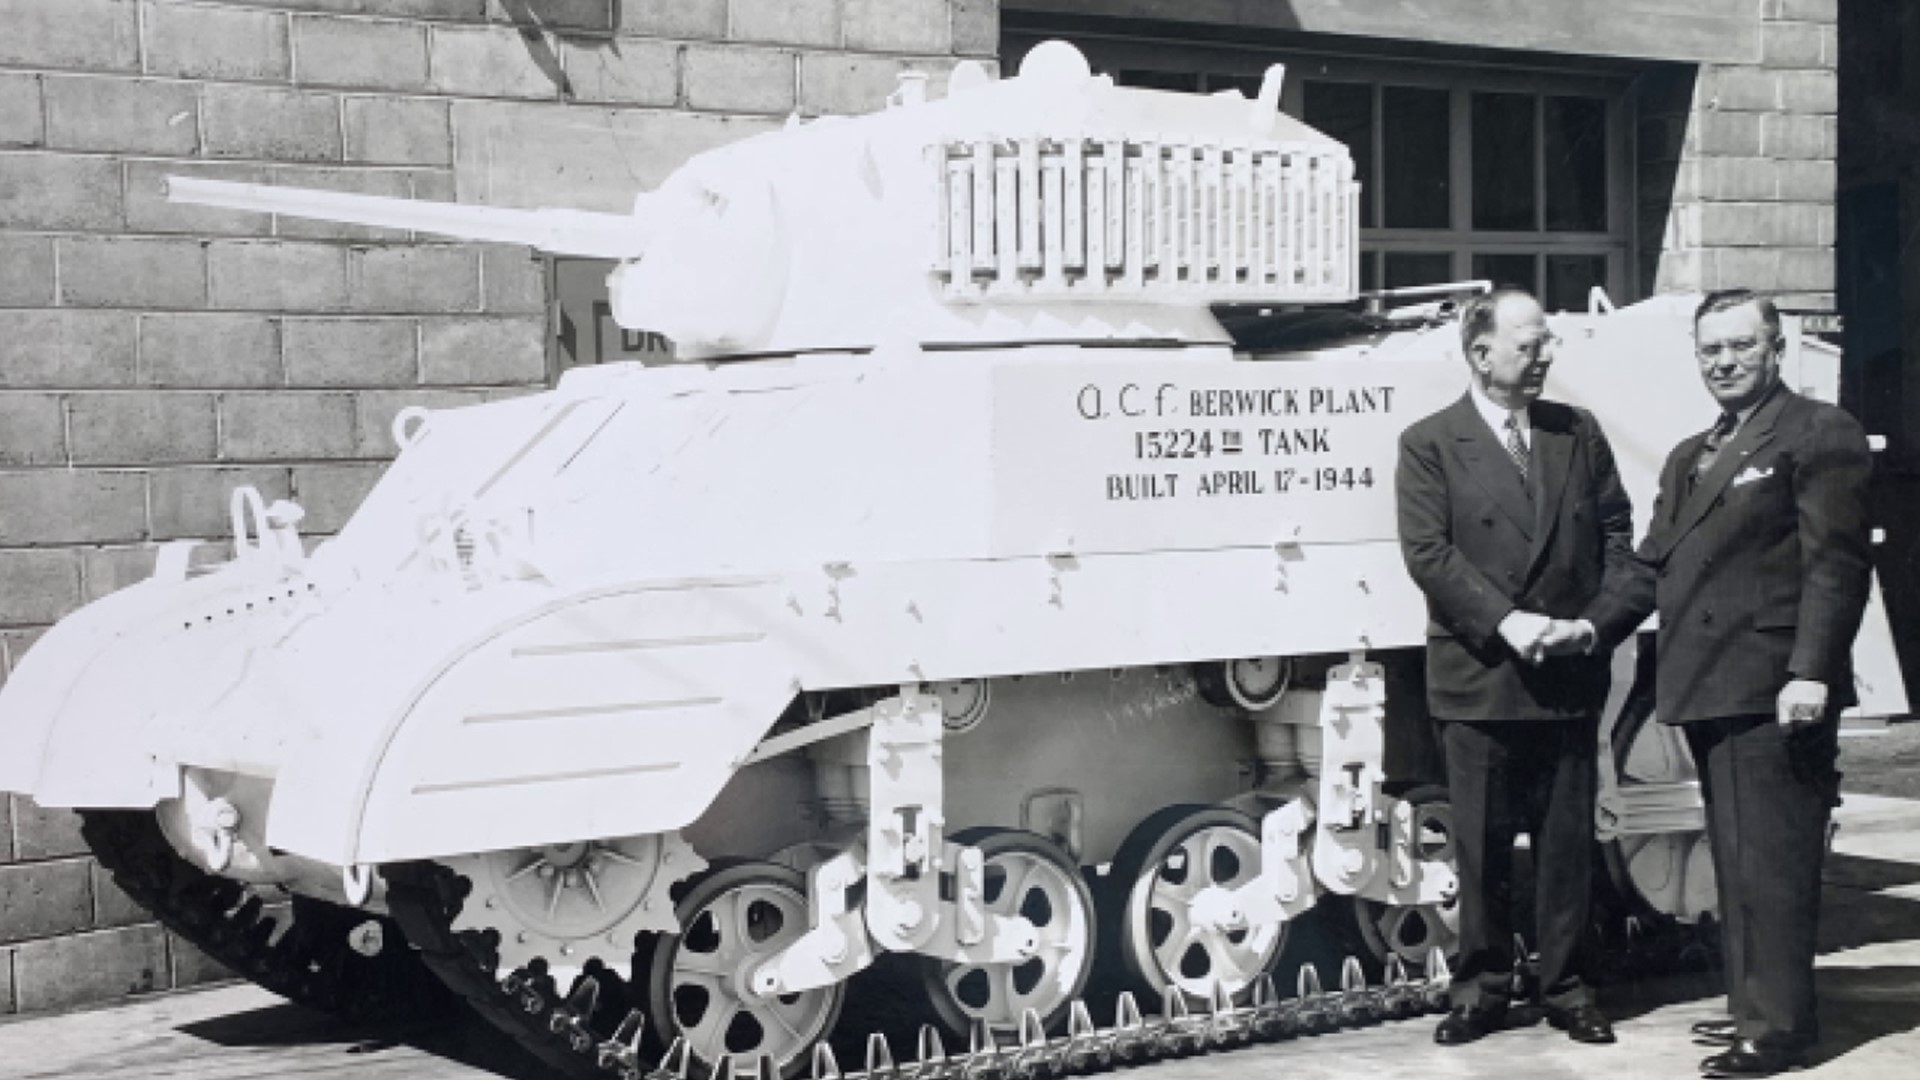 Jon Meyer headed to Berwick to see how a soldier would have squeezed into a tank during World War II.